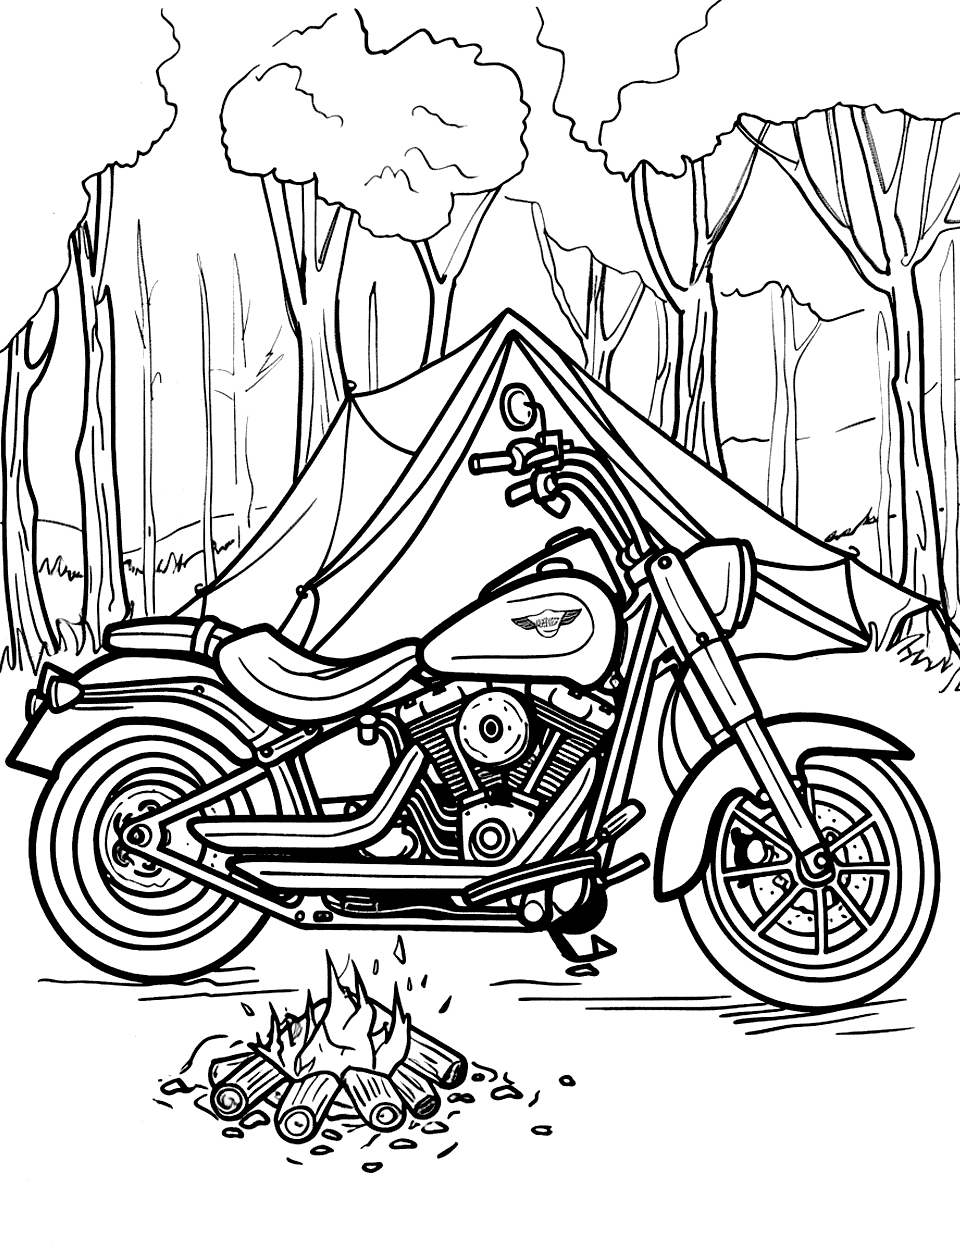 Motorcycle Camping Trip Coloring Page - A motorcycle parked at a campsite, with a tent and campfire nearby.